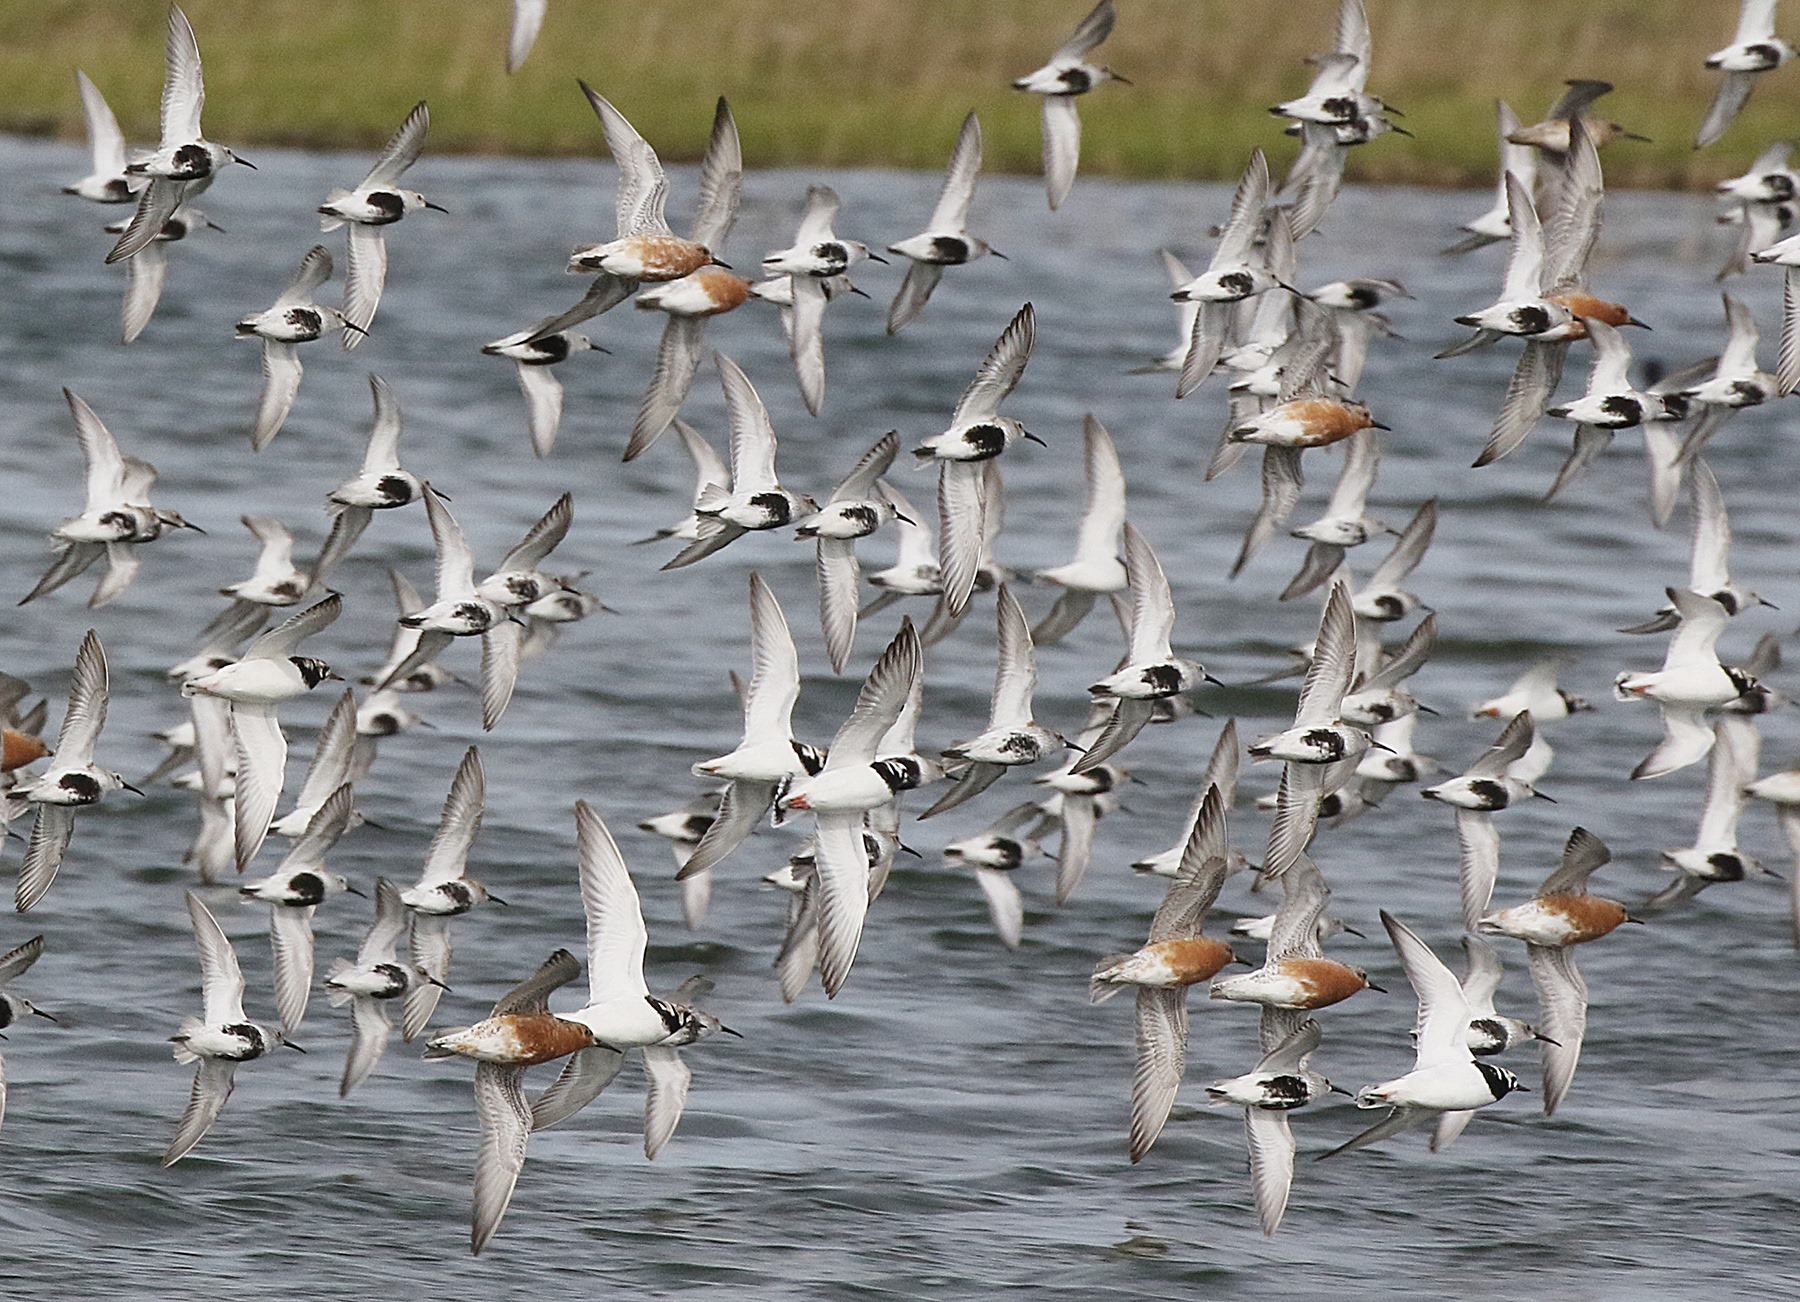 Red Knots and Dunlin migrating through Jamaica Bay in May. Photo: Don Riepe